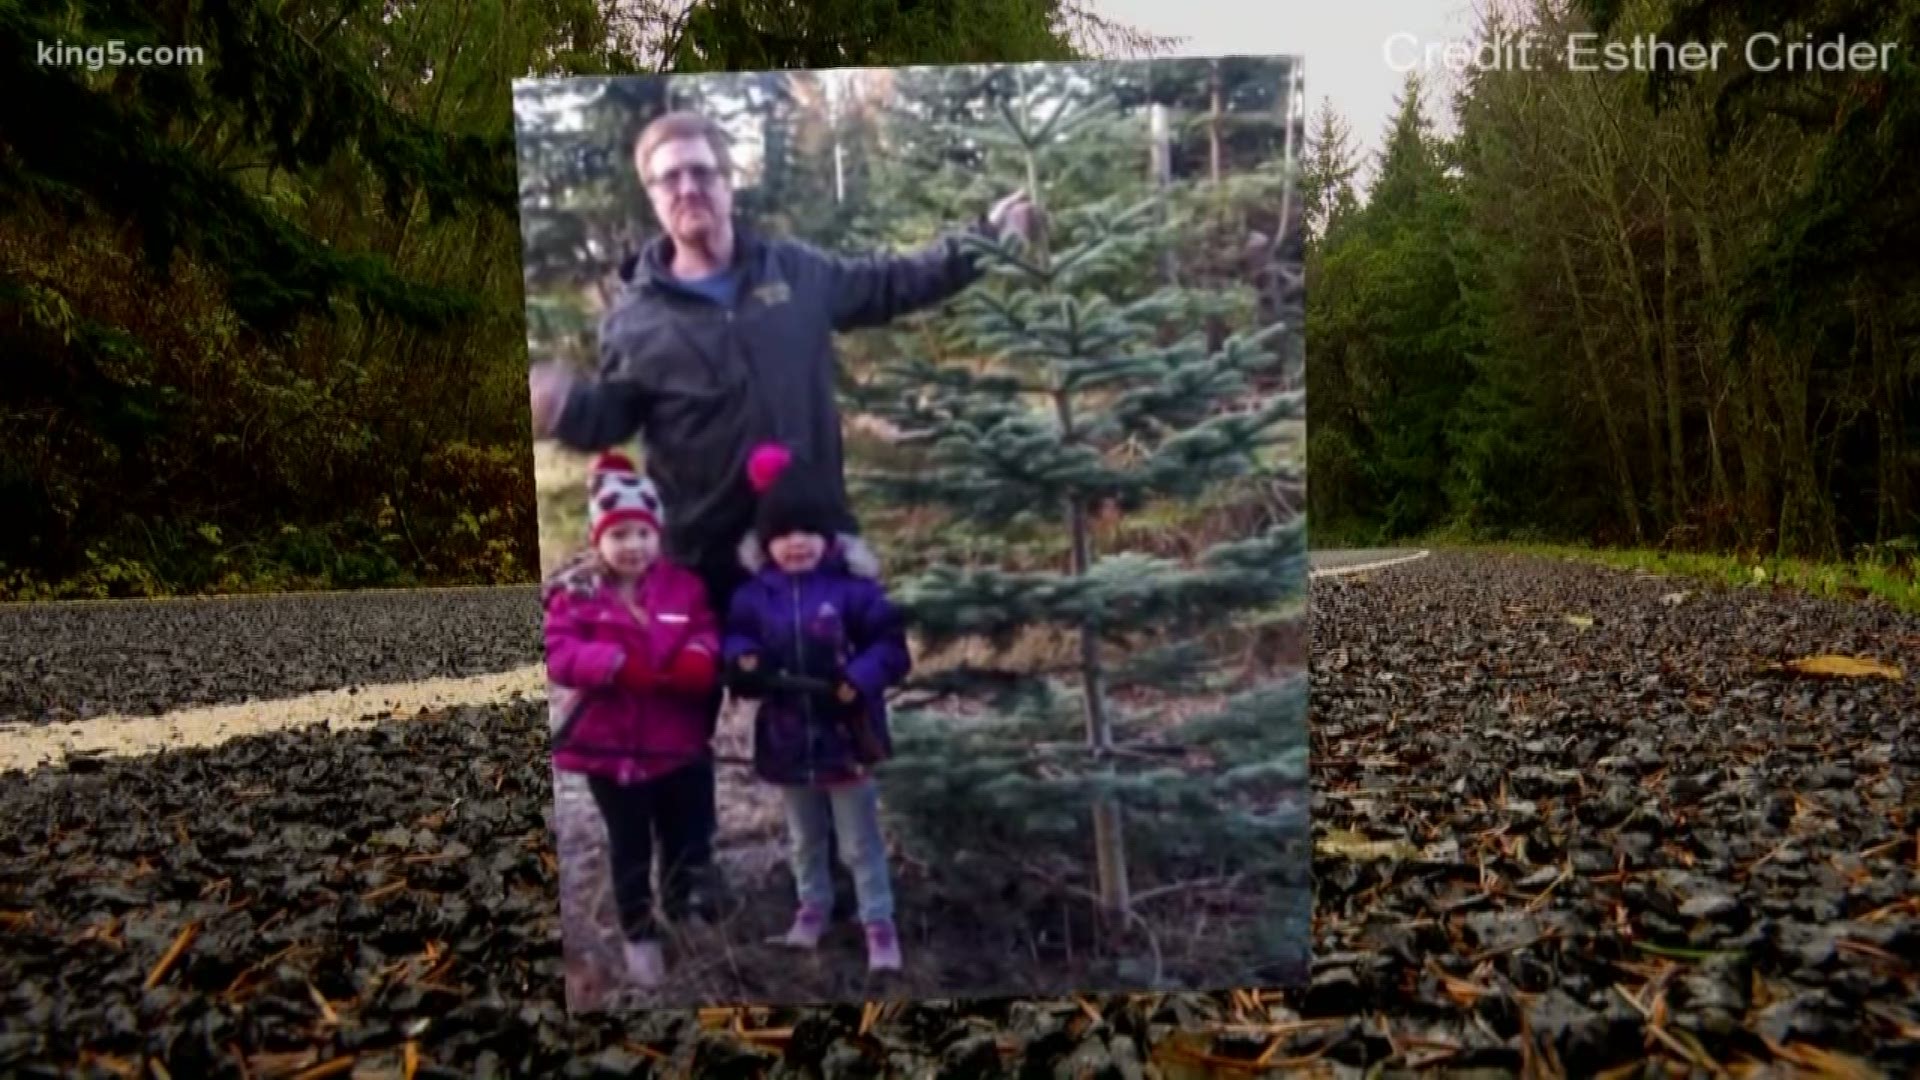 A family is looking for the Good Samaritan who helped their two 4-year-old girls get to safety after a tragic car crash killed their father.